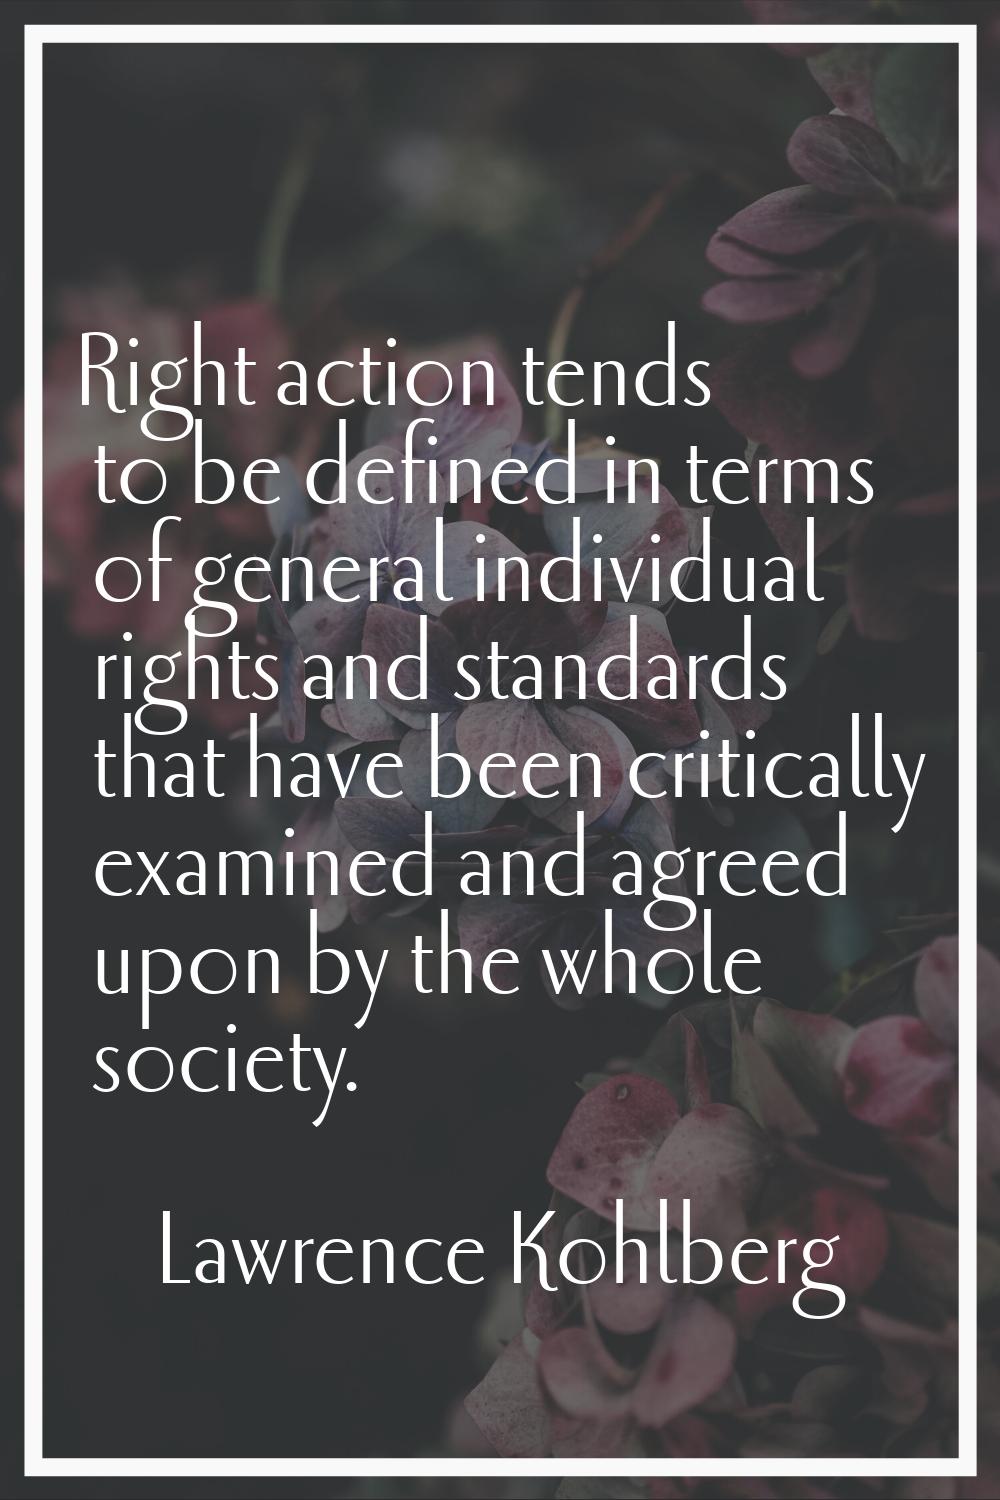 Right action tends to be defined in terms of general individual rights and standards that have been